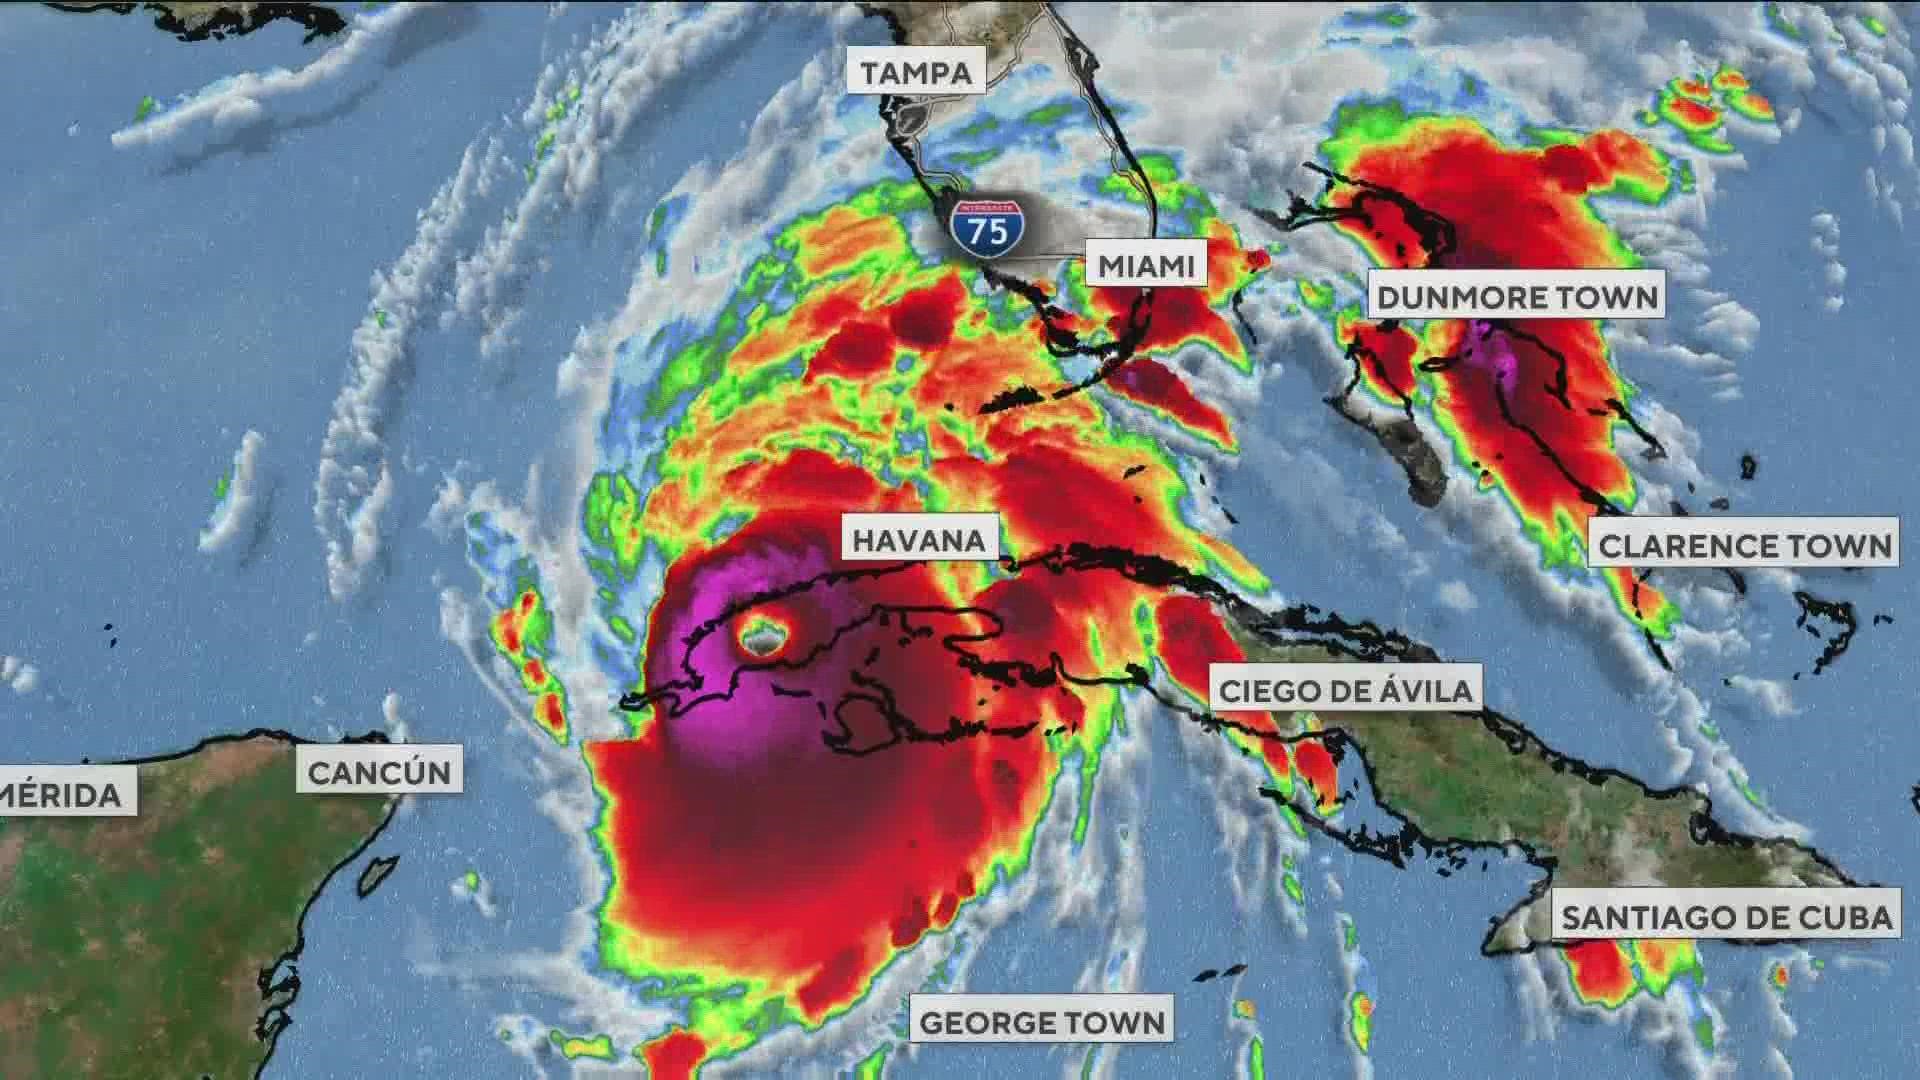 While many Floridians evacuated areas at high-risk as Hurricane Ian approached, not everyone left.